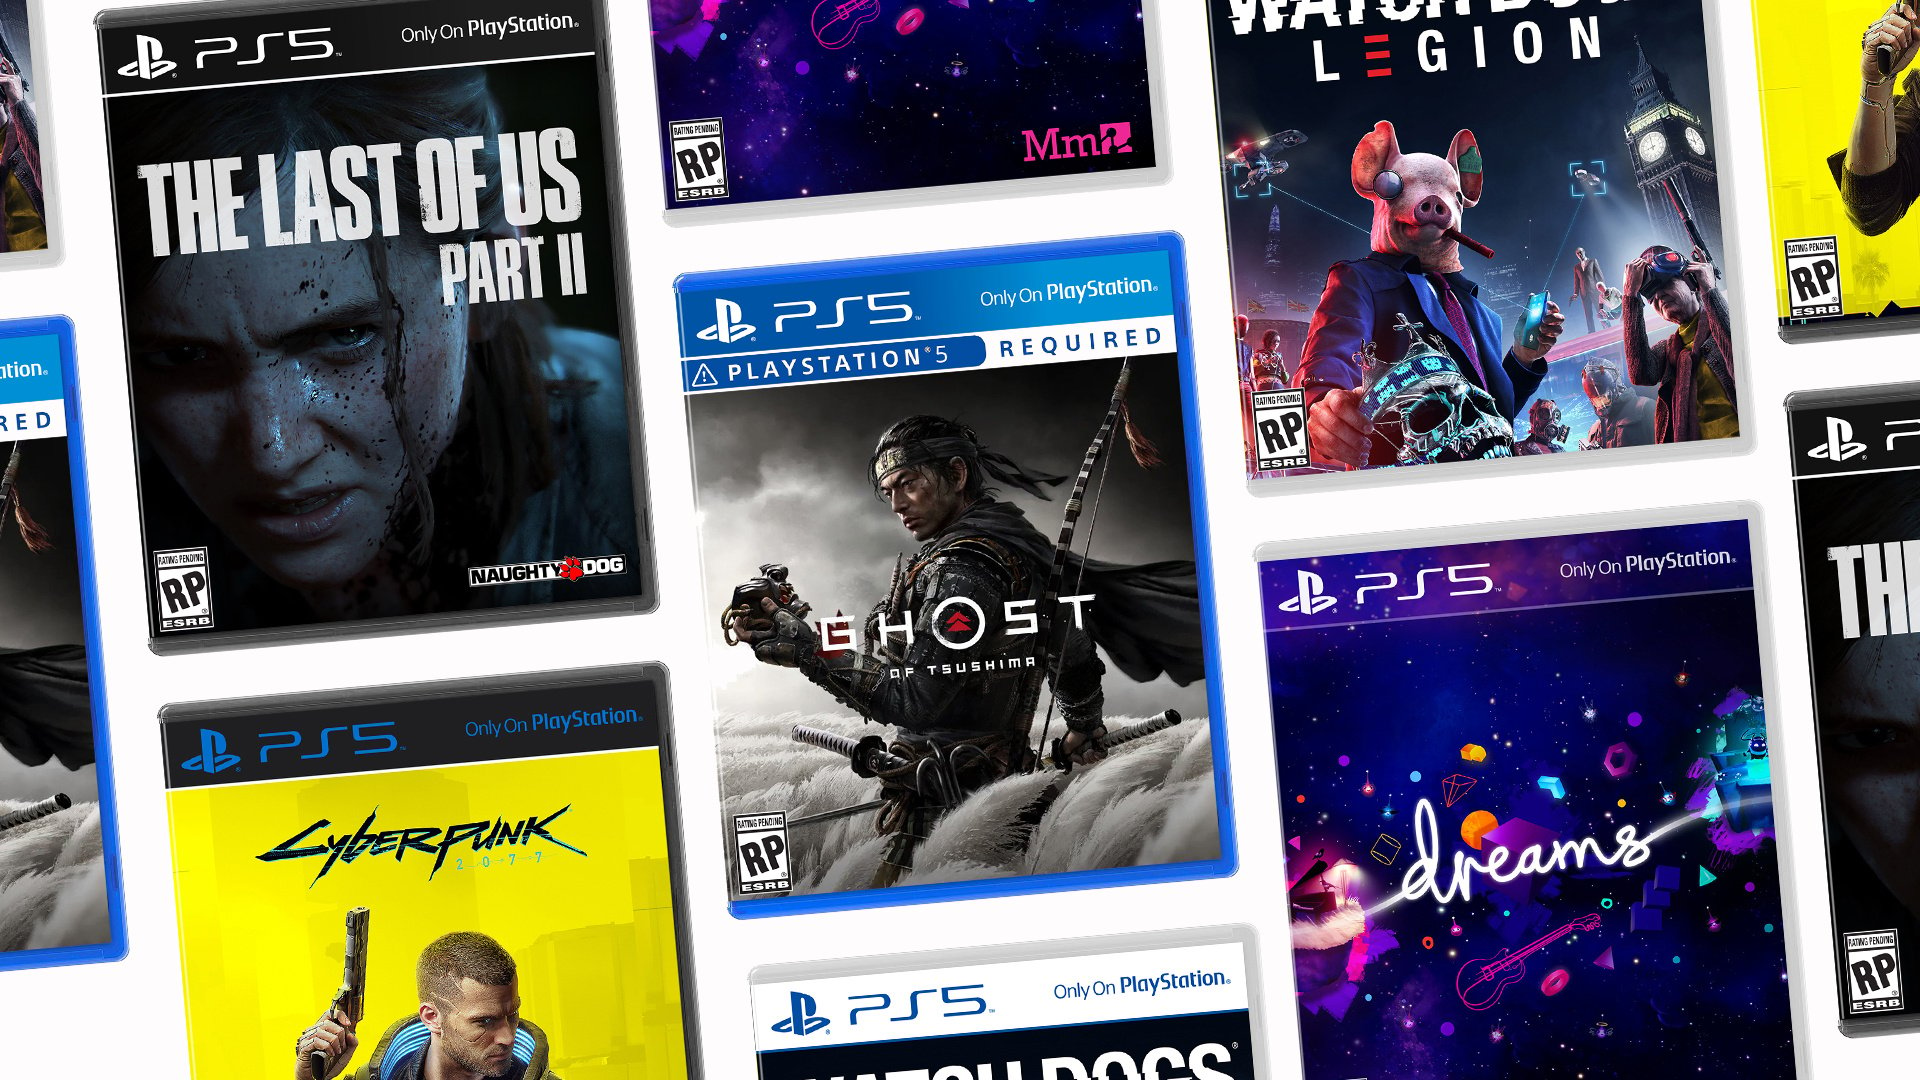 games coming on ps5